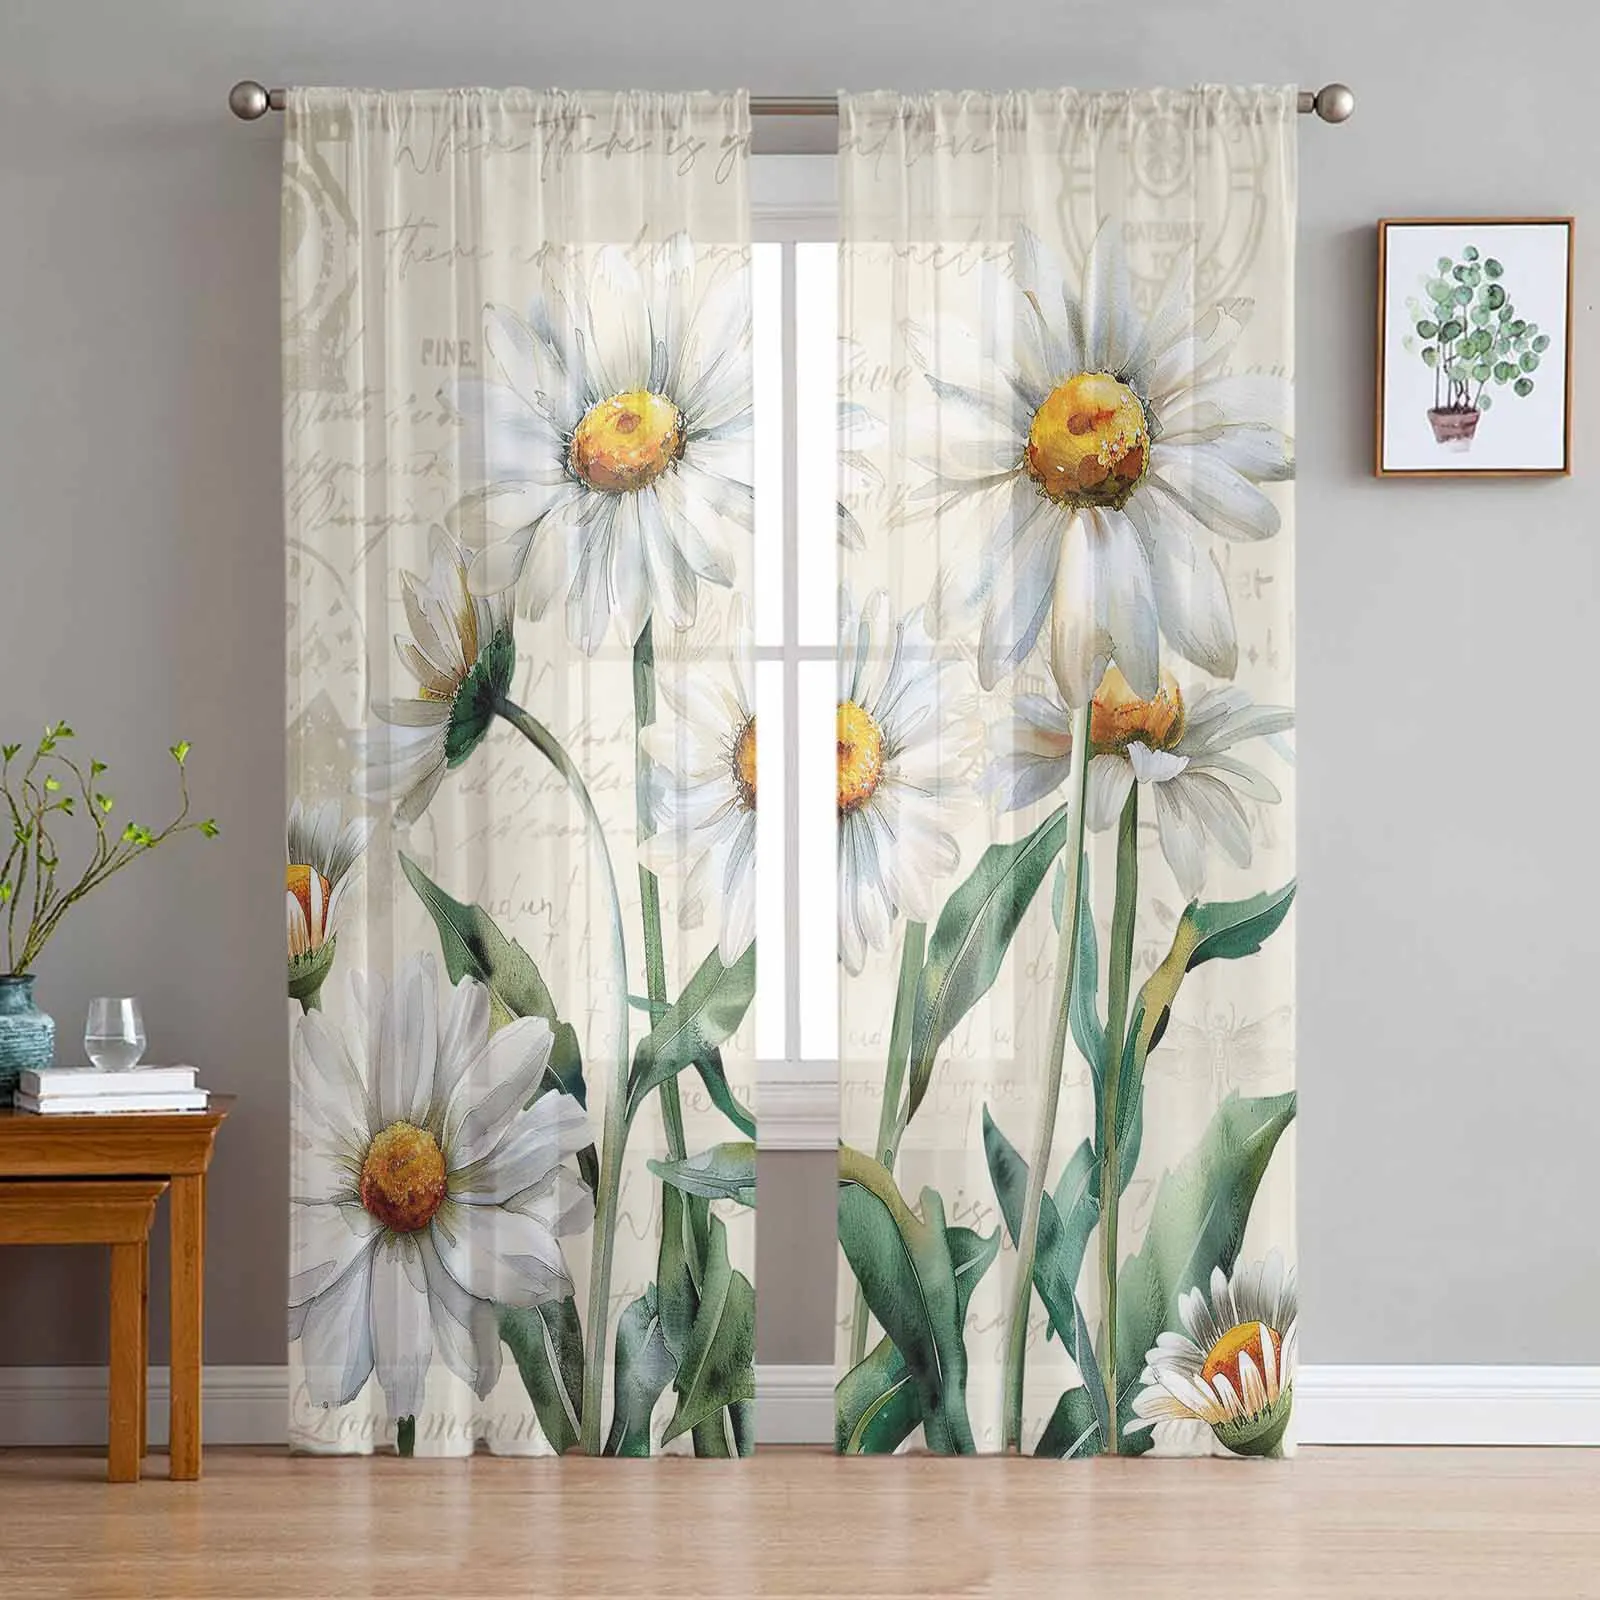 

Spring Flower Daisy Retro Tulle Curtains for Living Room Sheer Curtain for Bedroom Kitchen Blinds Voile Curtains